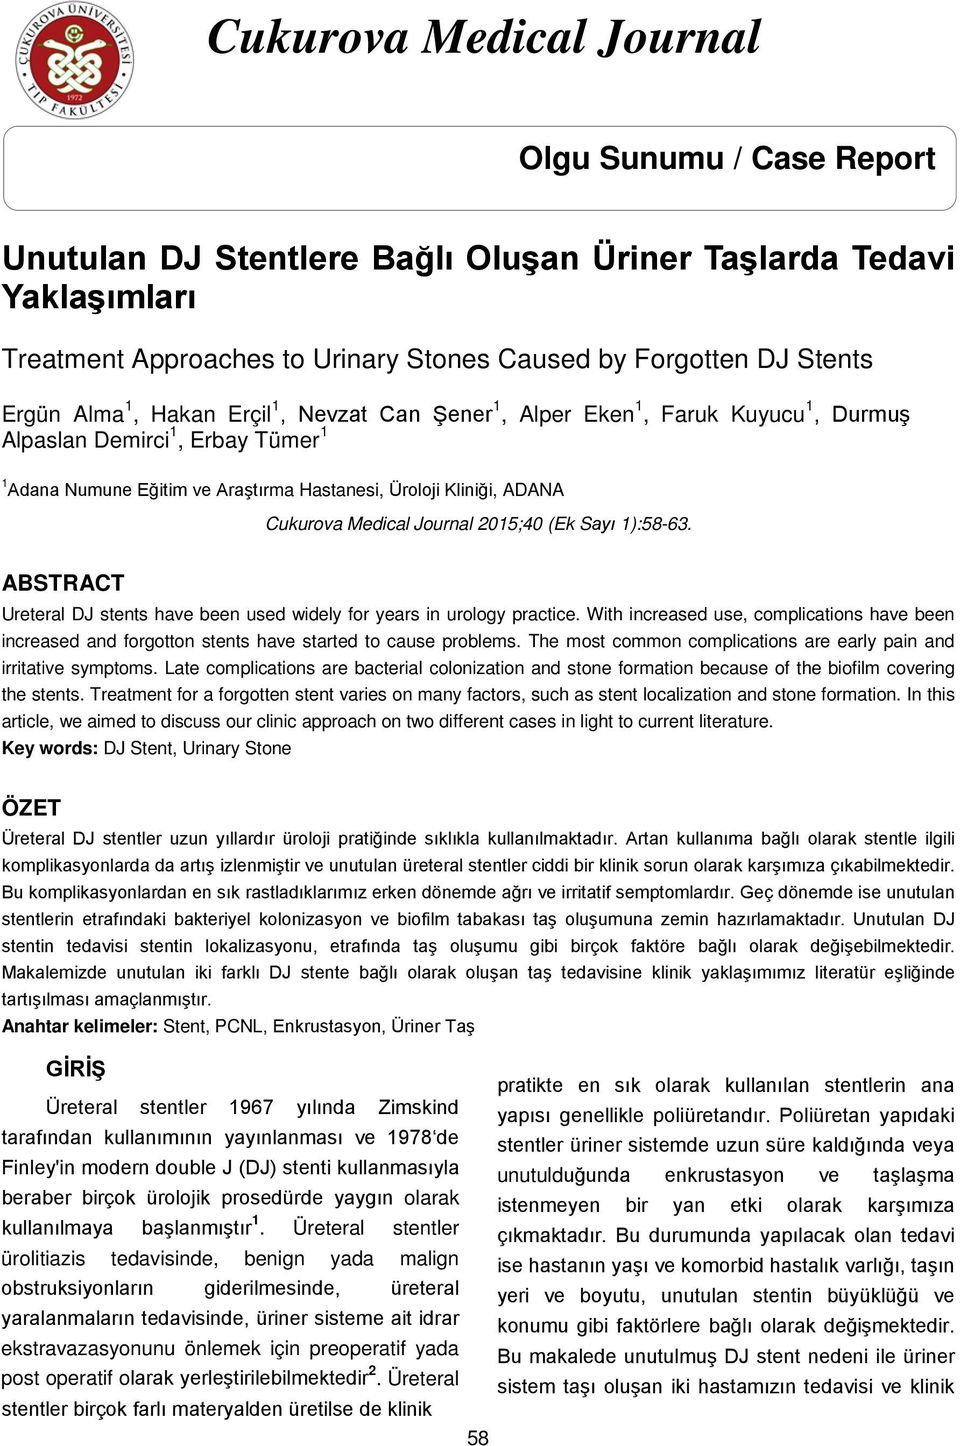 Journal 2015;40 (Ek Sayı 1):58-63. ABSTRACT Ureteral DJ stents have been used widely for years in urology practice.